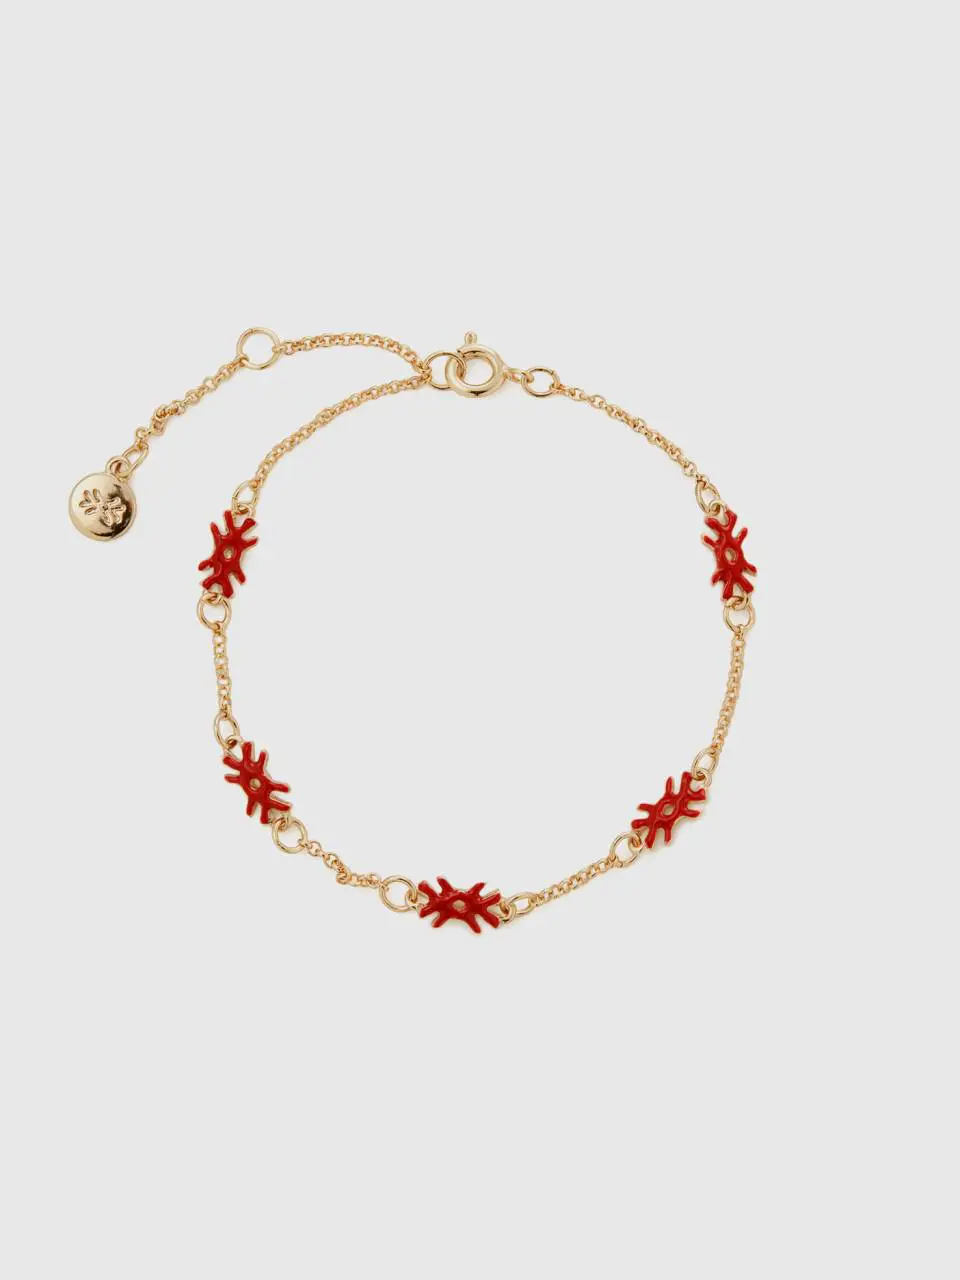 Benetton bracelet with coral red logos. 1